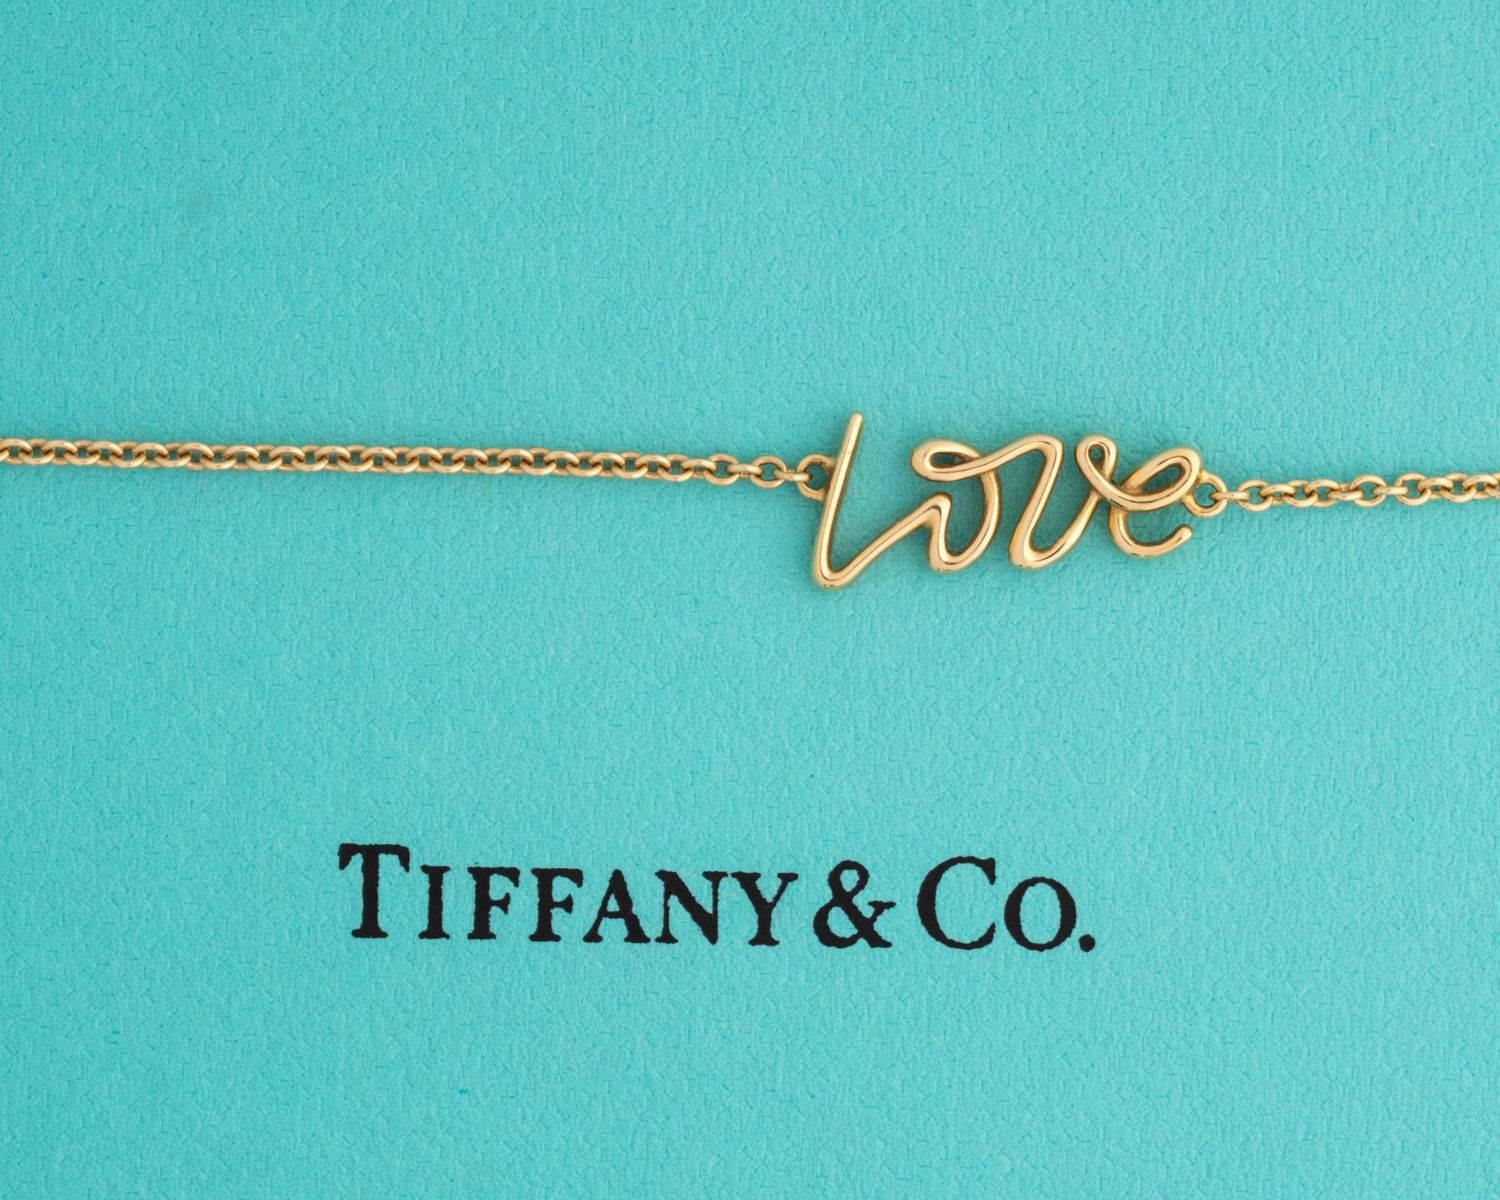 Tiffany and Co. Paloma Picasso Love Bracelet - 18 Karat Gold

This delicate chain bracelet is part of the Tiffany and Co. Paloma Picasso Collection. It is crafted from rich 18 Karat Yellow Gold. A fine chain extends from each end and meets at the